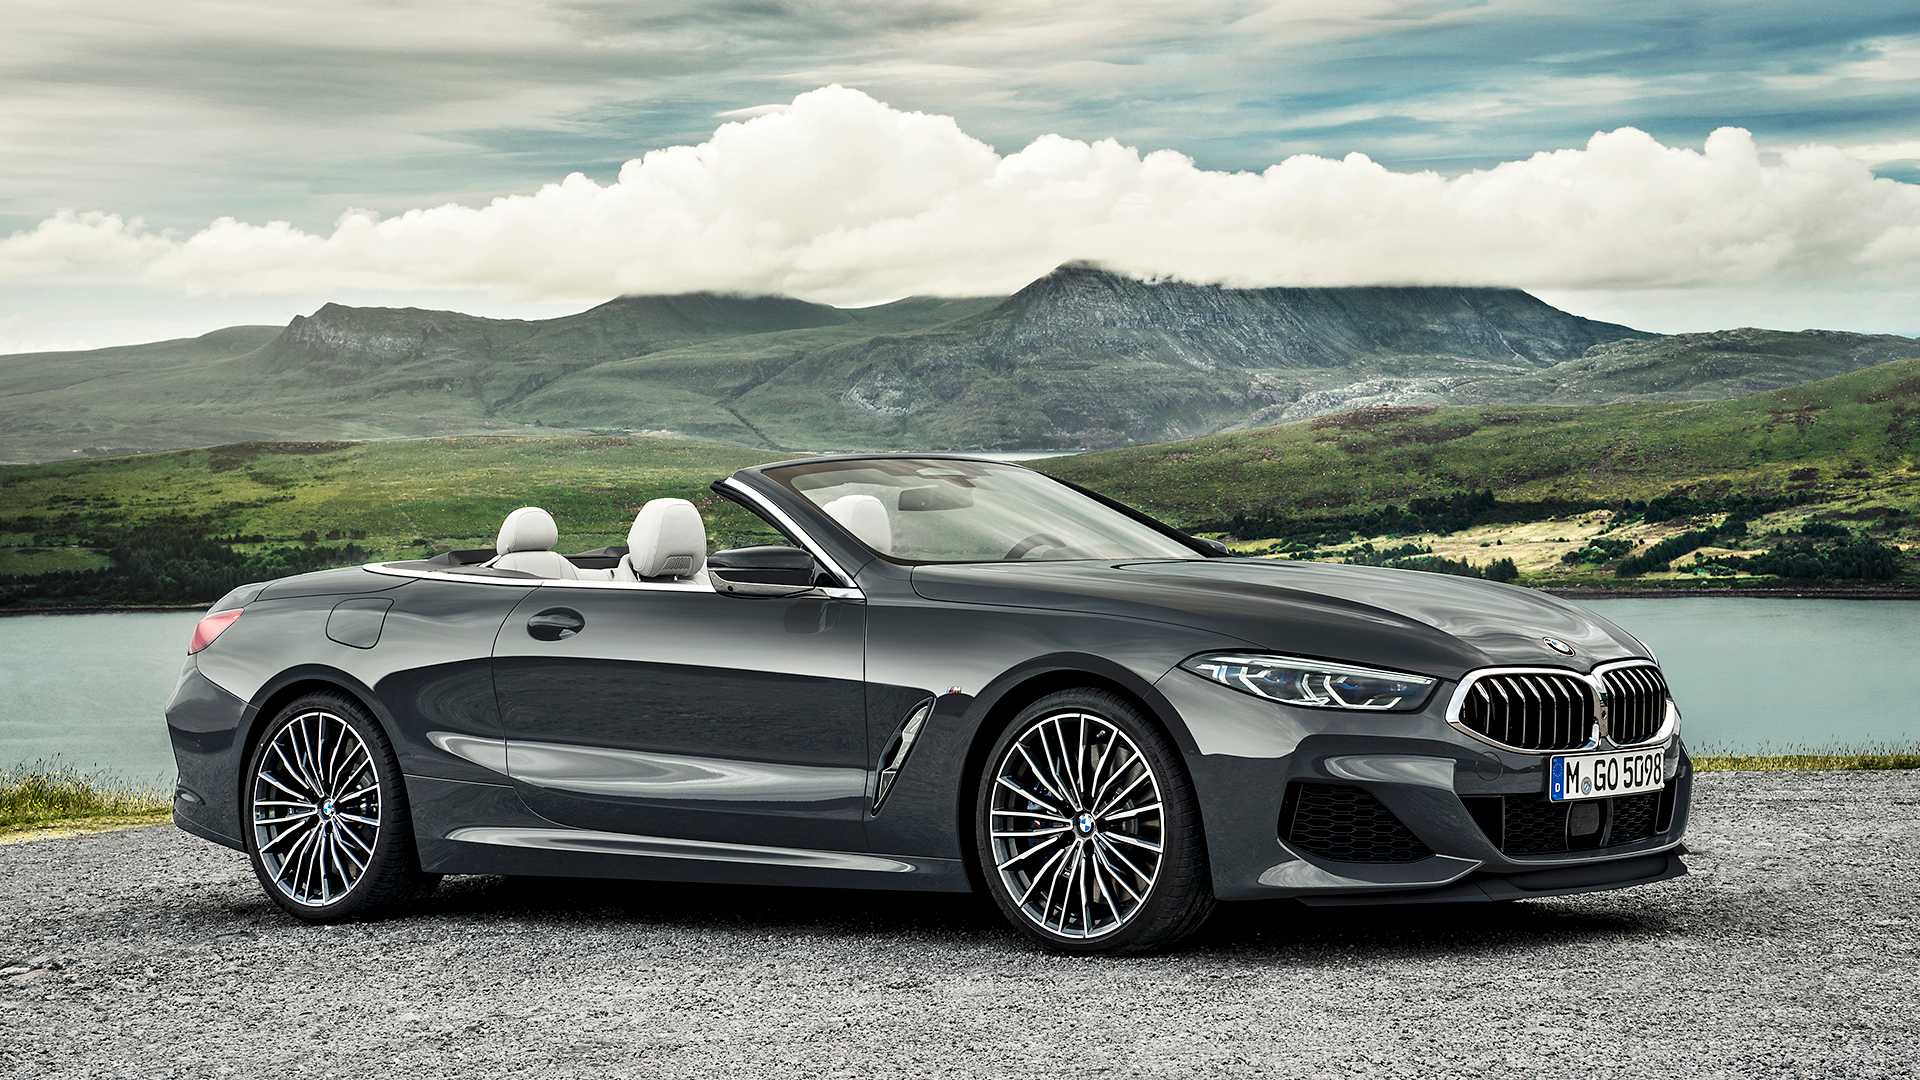 2019 BMW 8 Series Convertible Loses Its Roof, Still Looks Lovely